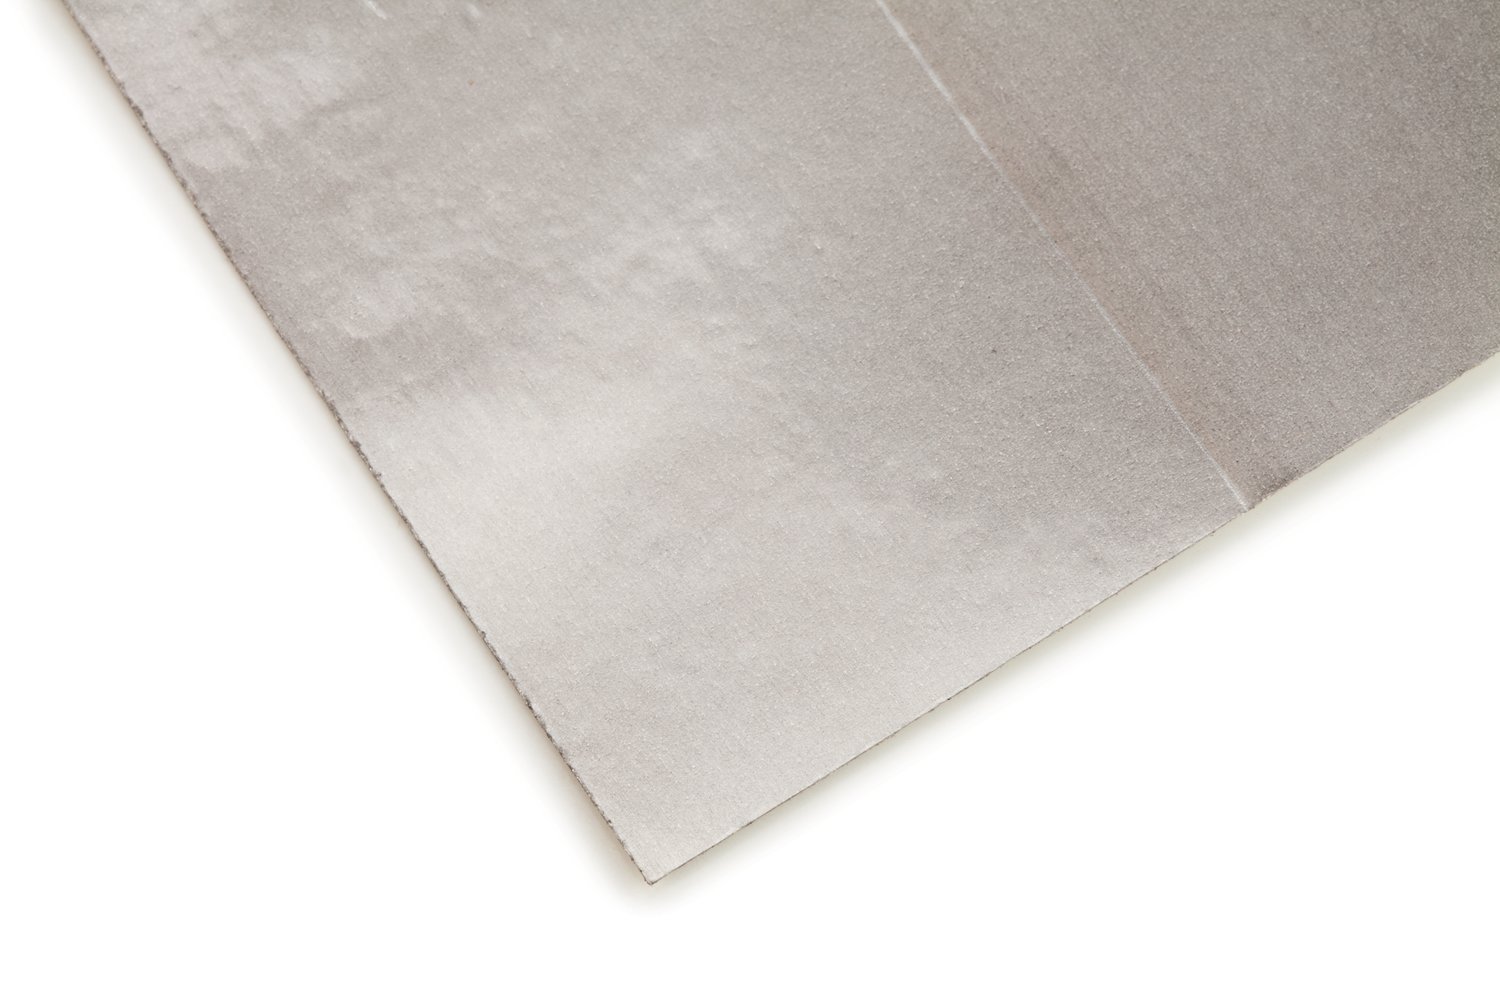 7100053589 - 3M High Permeability Magnetic Shielding Sheet 1380, 2 in x 8 in, 10
Sheets/Bag